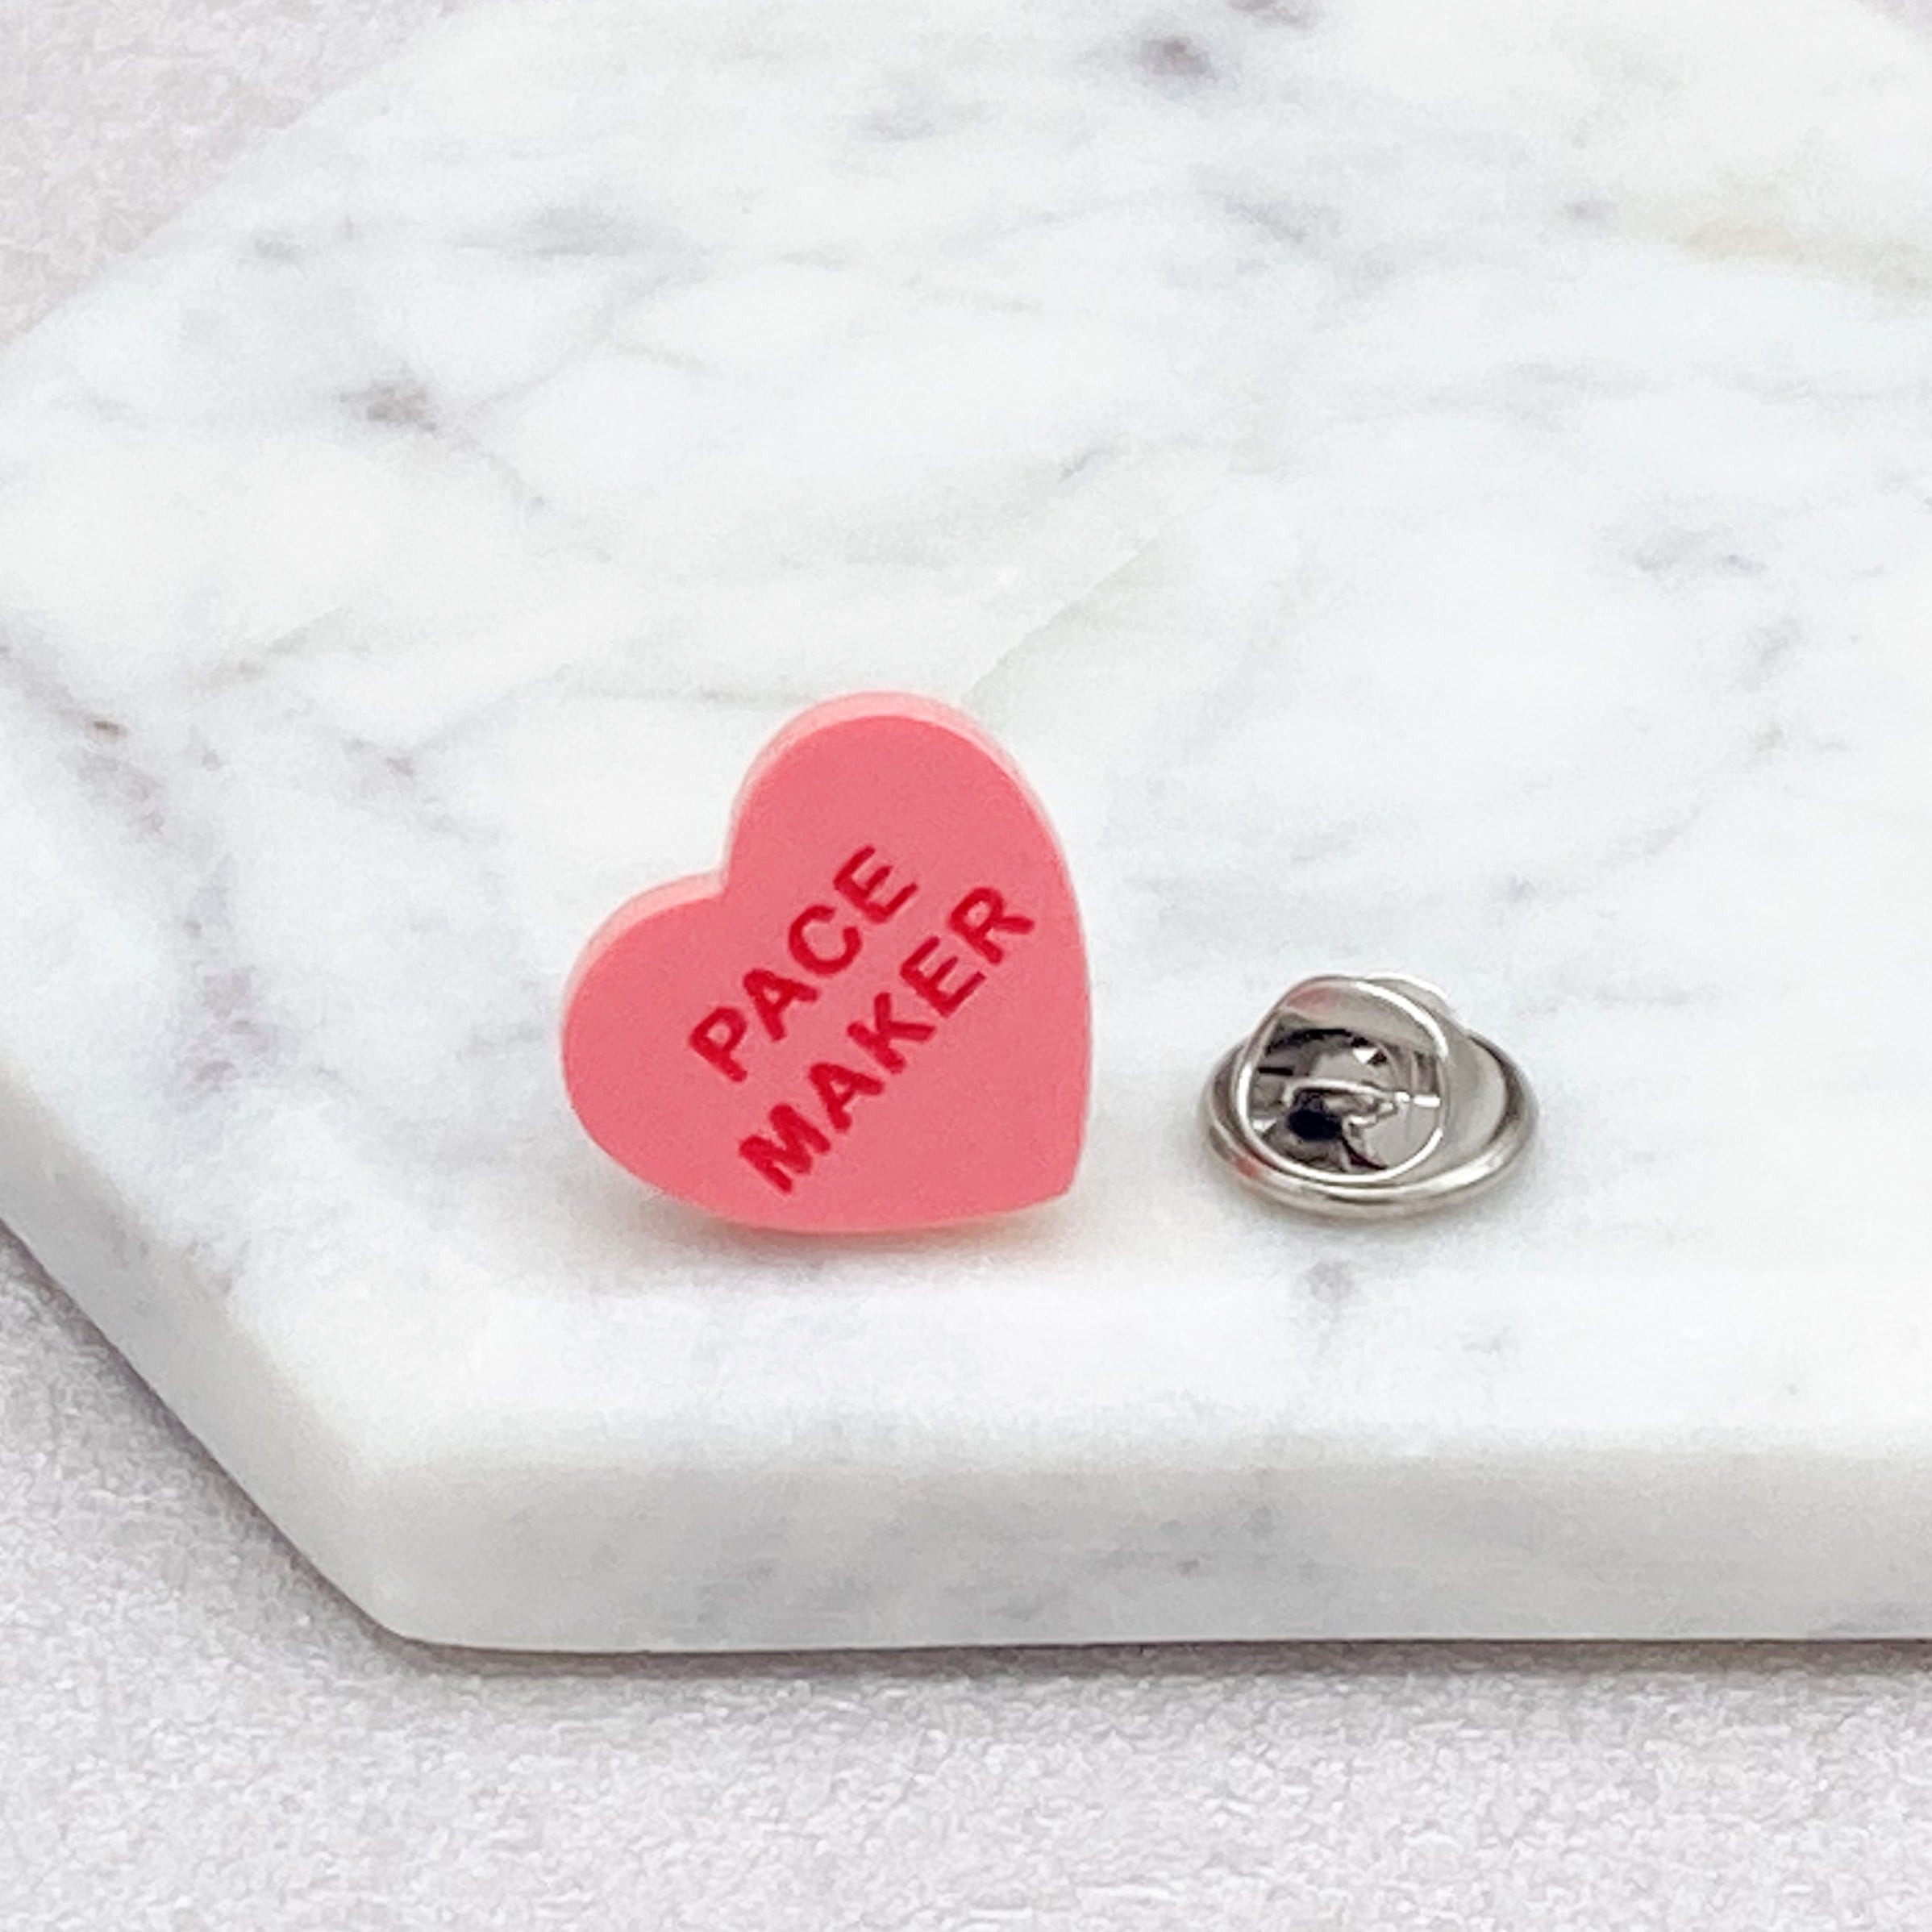 pacemaker pin badge gift cute